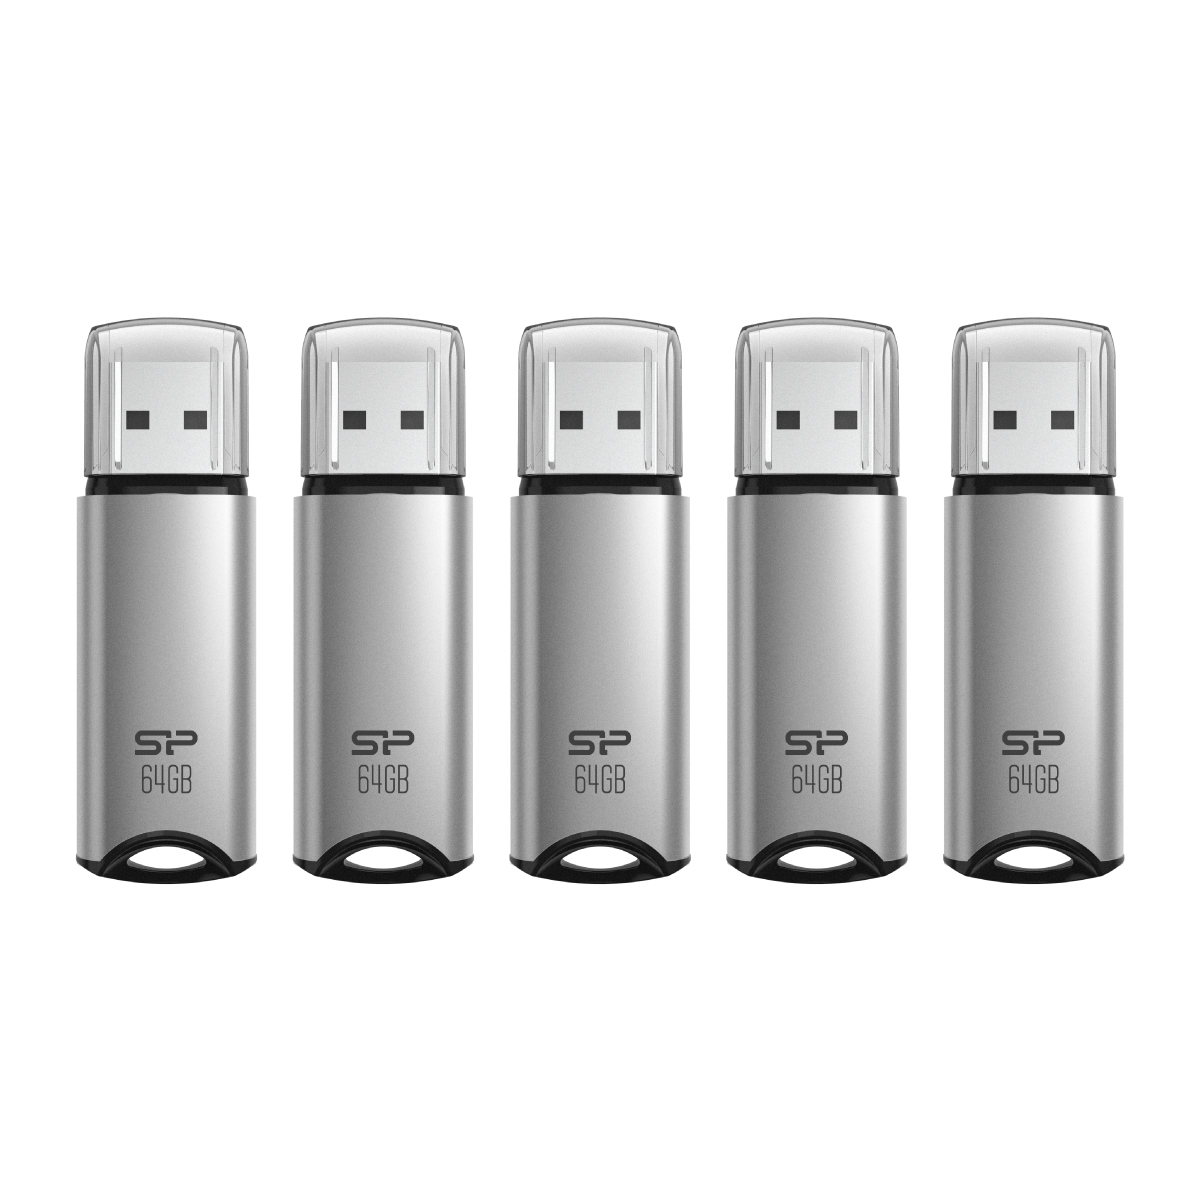 Silicon Power 64GB Marvel M02 USB 3.0 Flash Drive - Silver (5-Pack)